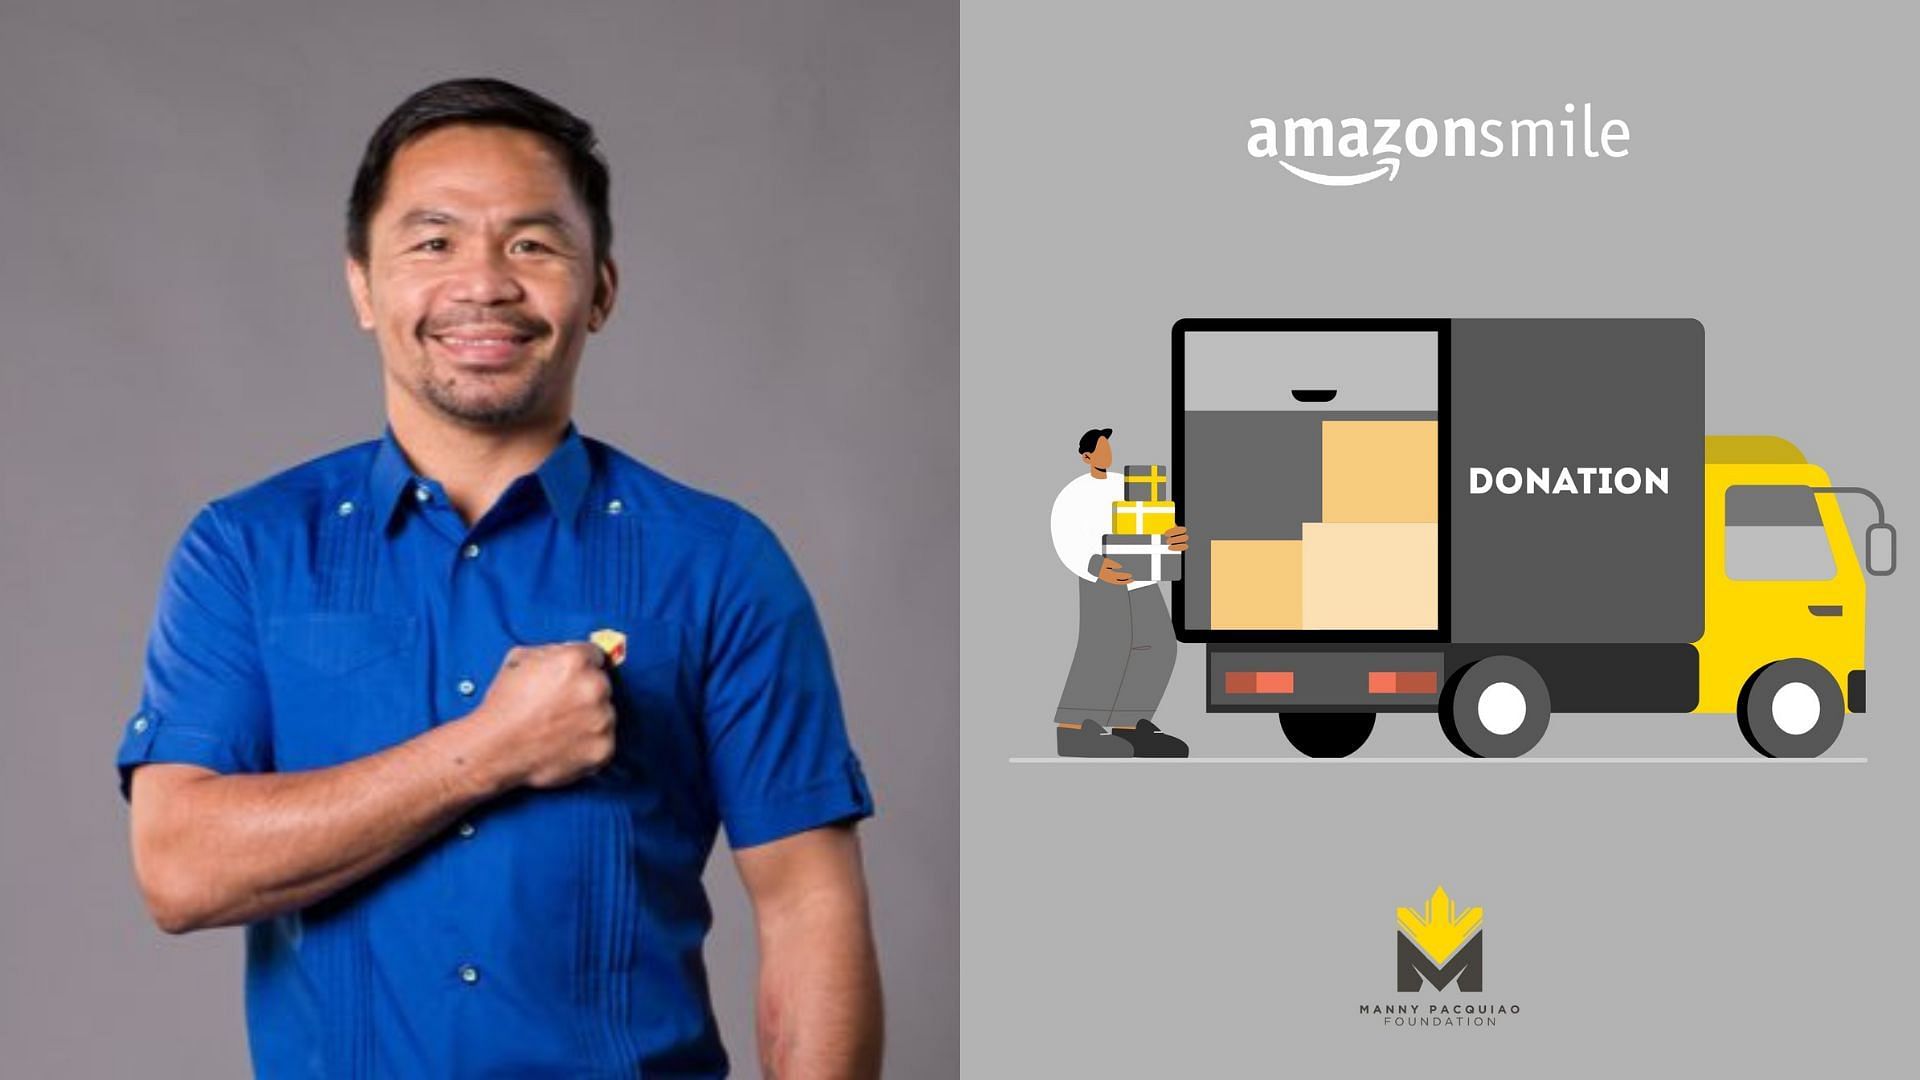 Manny Pacquiao Foundation join hands with Amazon